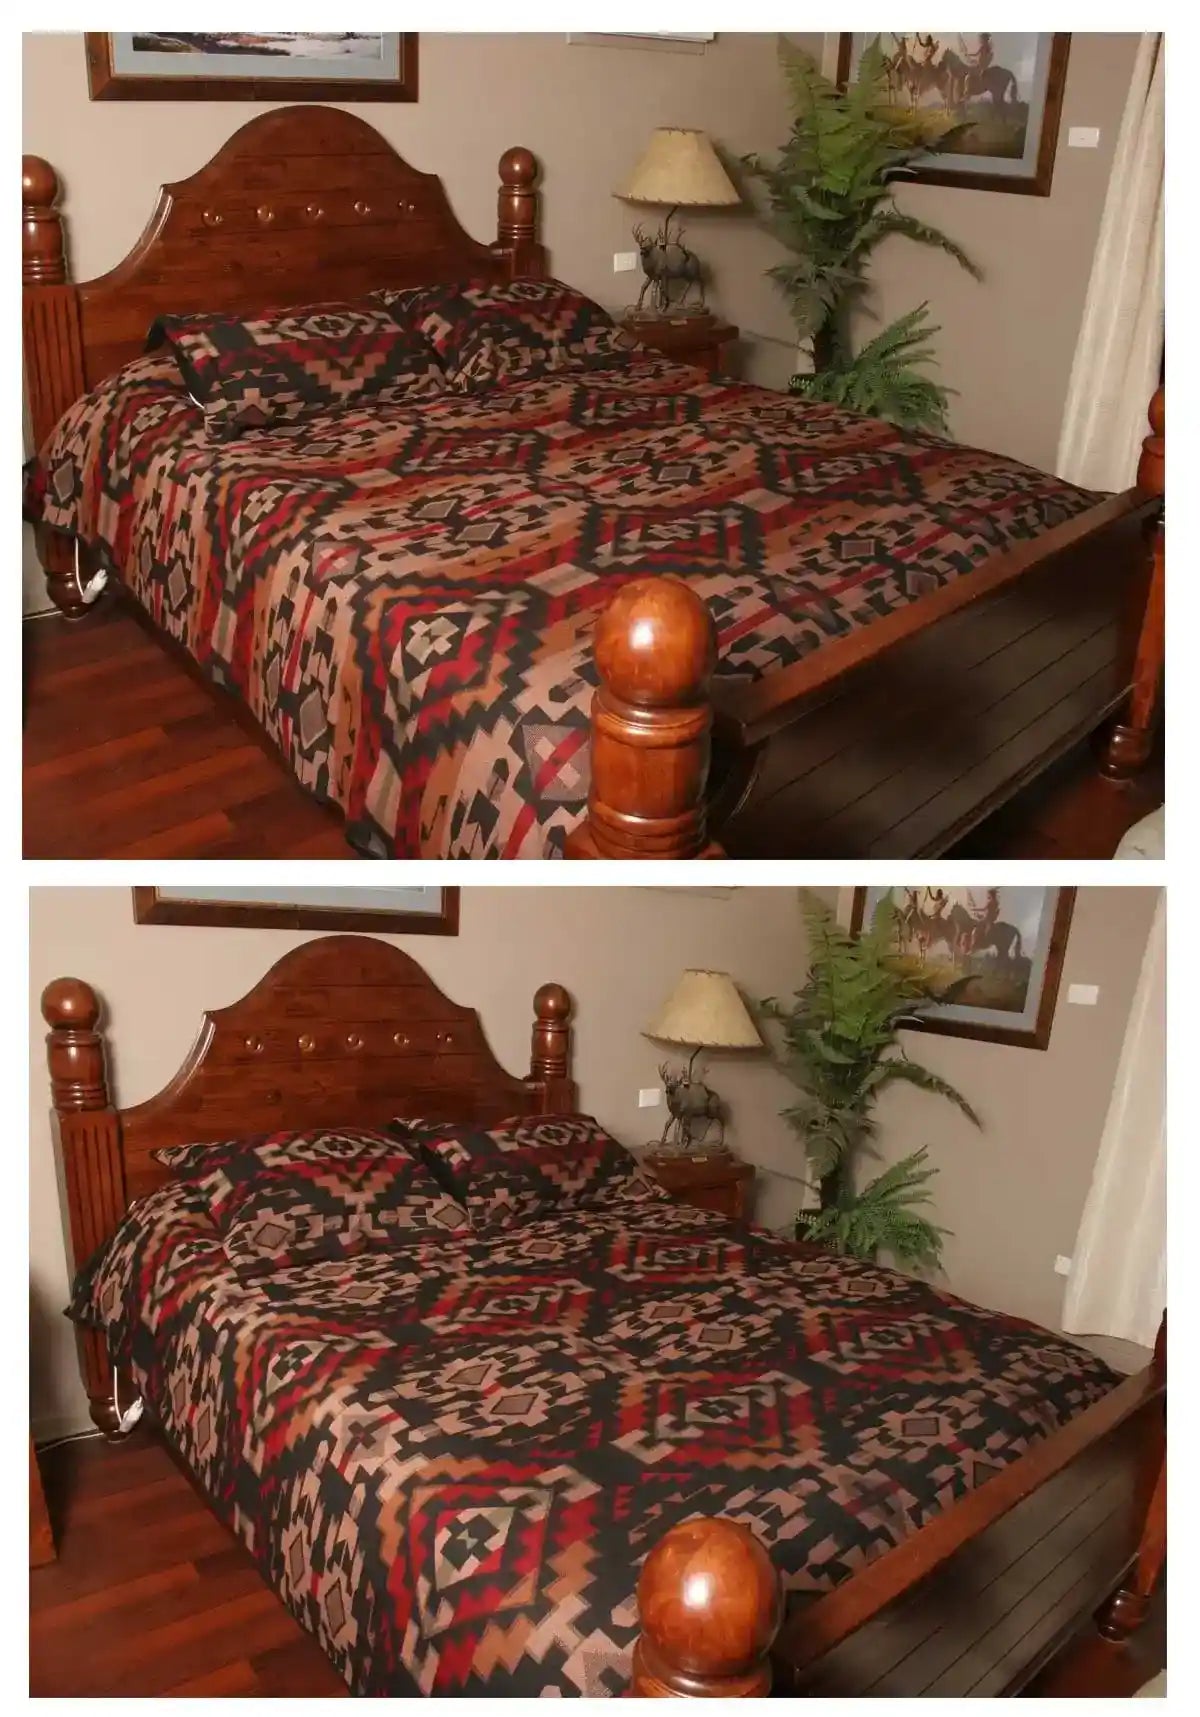 Bedspread Set OBED7022E By Western Trading Co